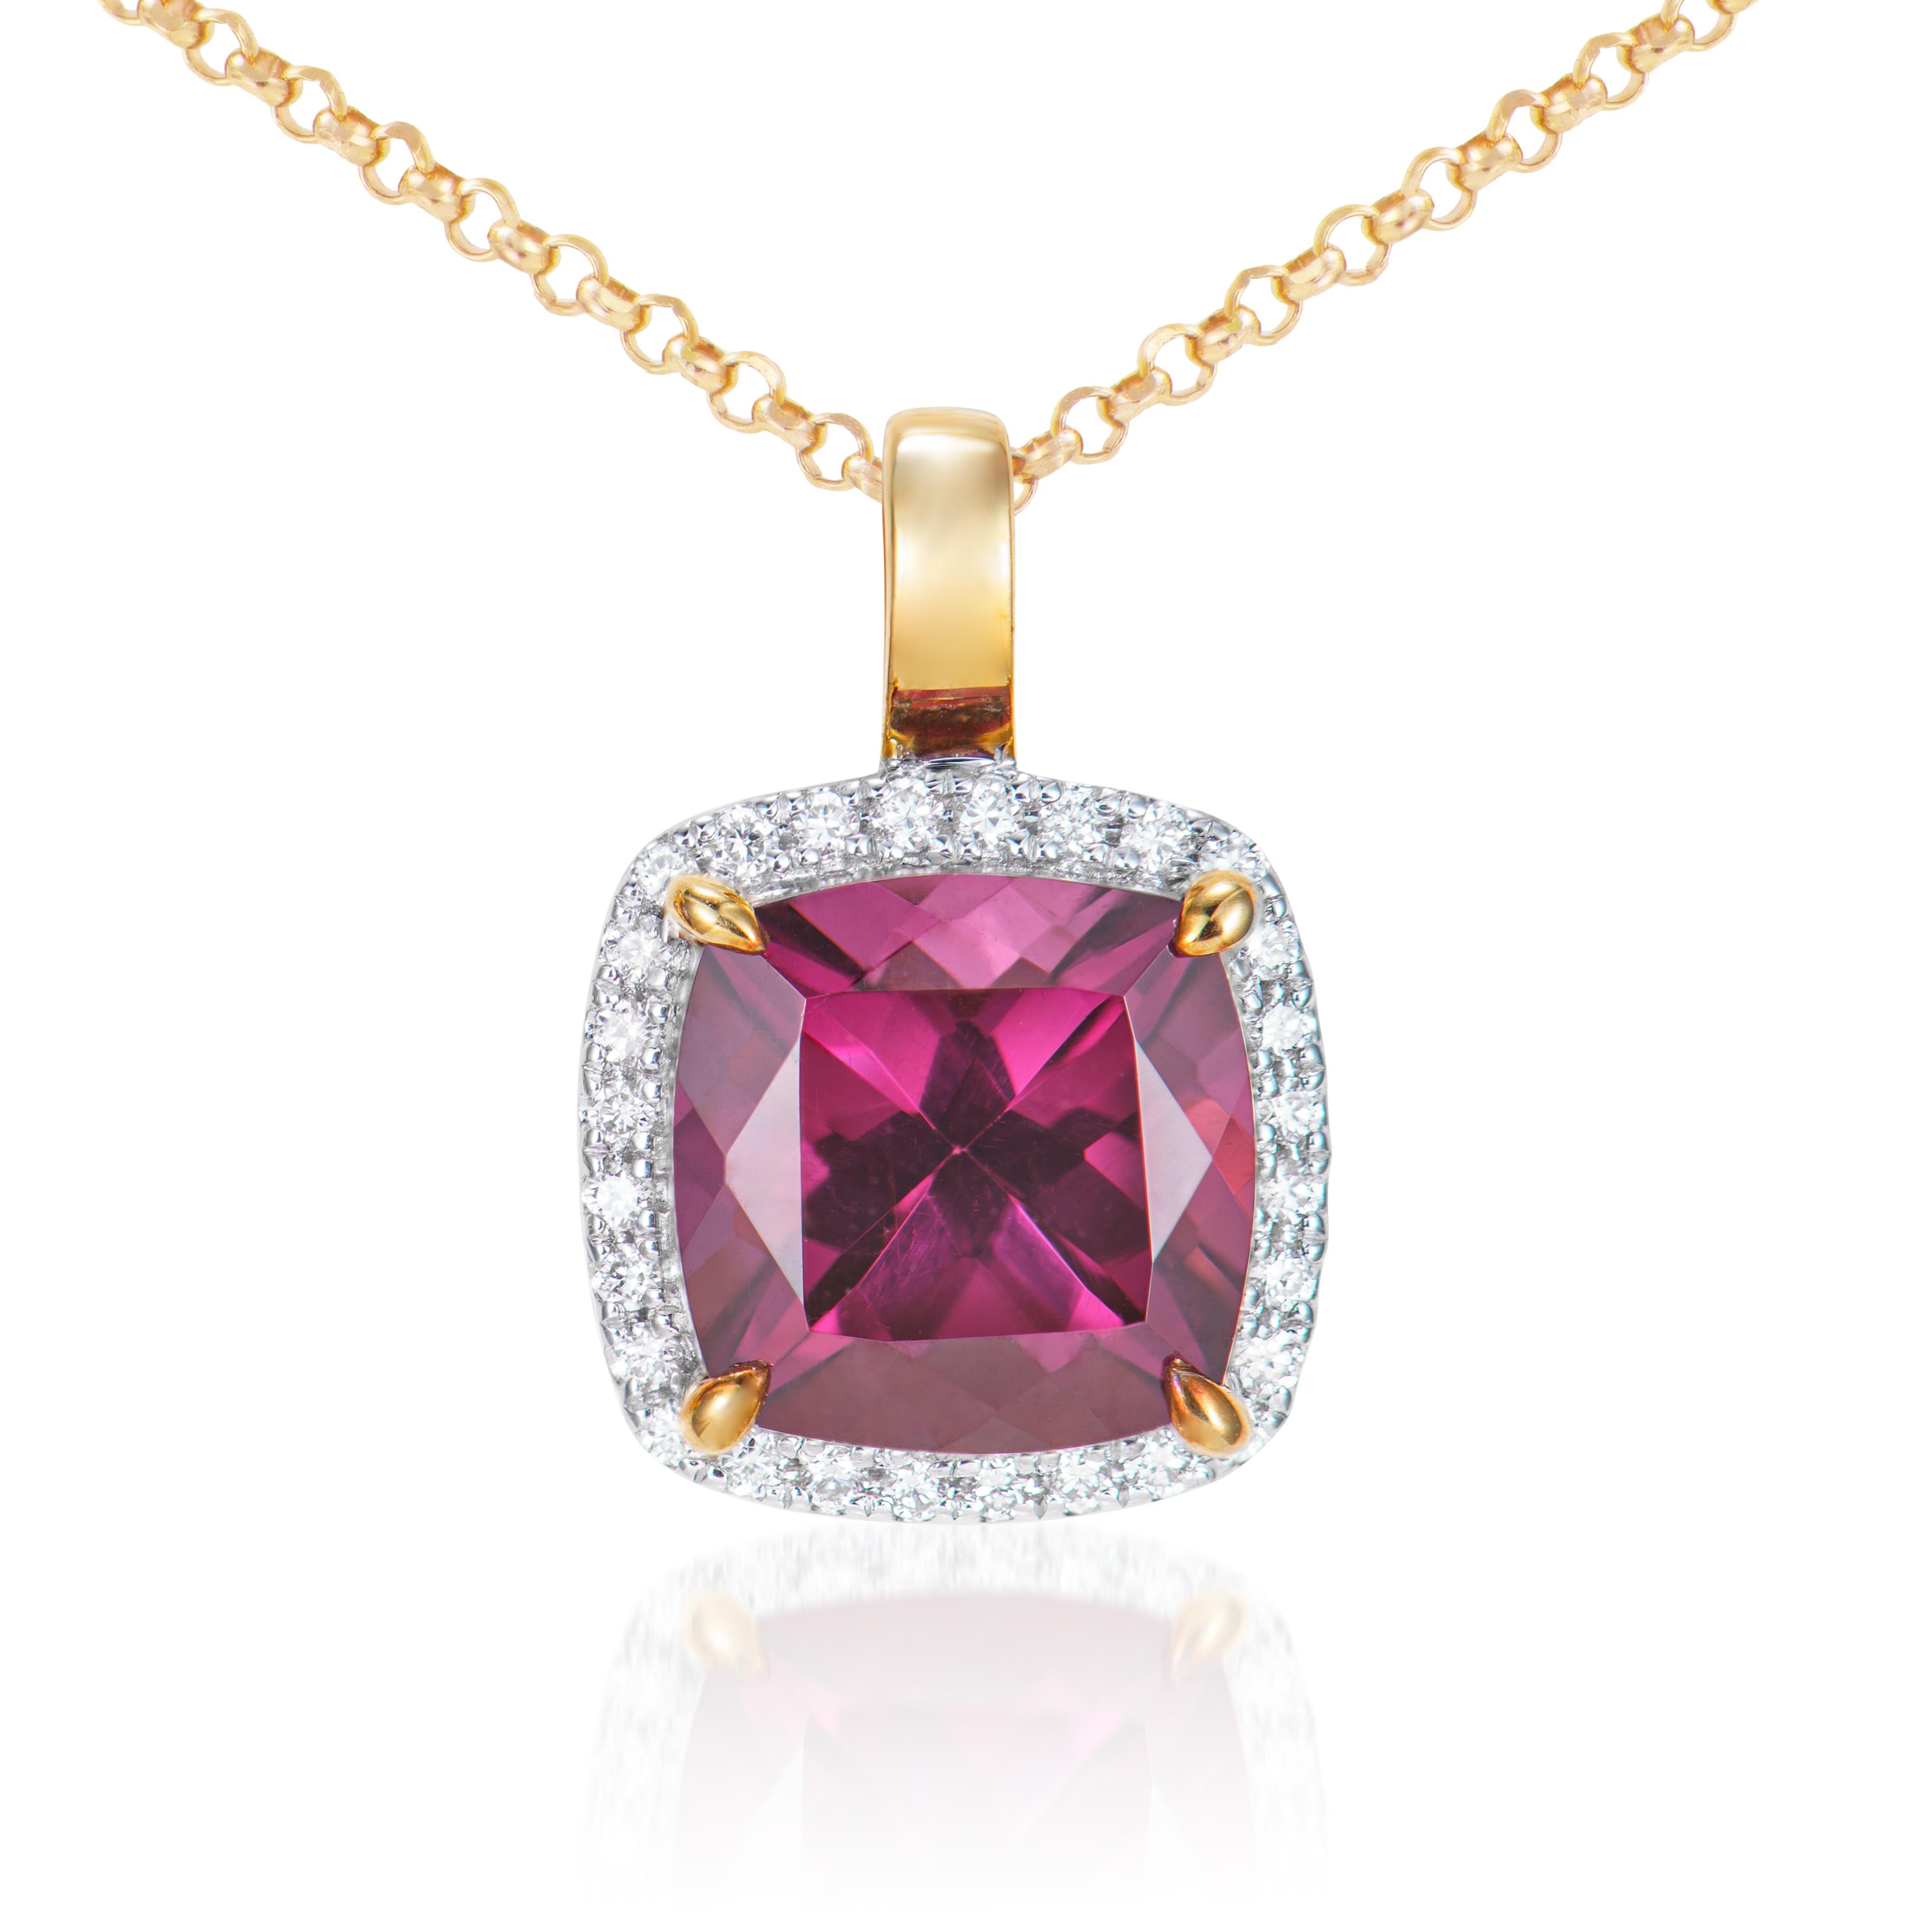 Presented A lovely collection of gems, including Amethyst, Peridot, Rhodolite, Sky Blue Topaz, Swiss Blue Topaz and Morganite is perfect for people who value quality and want to wear it to any occasion or celebration. The yellow gold Rhodolite